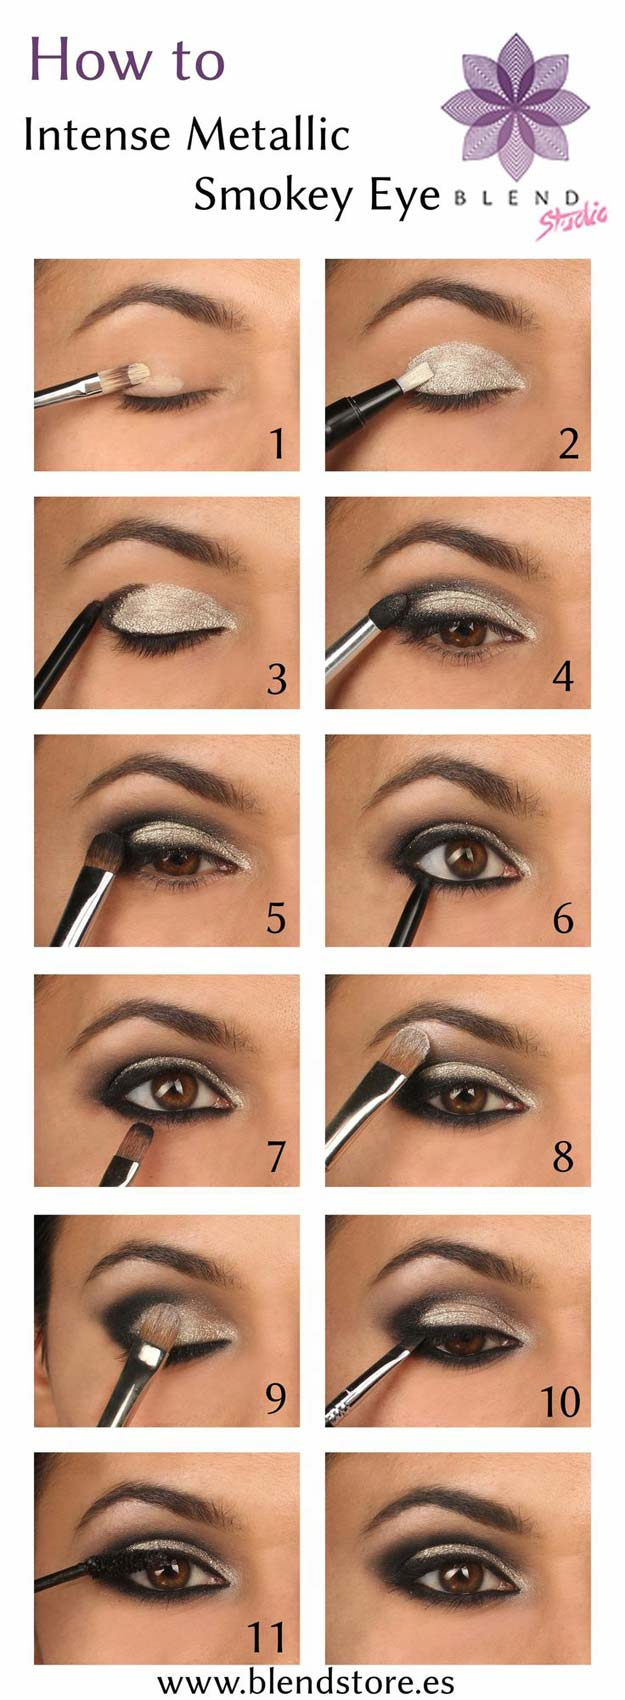 Prom Makeup Ideas For Brown Eyes 38 Makeup Ideas For Prom The Goddess